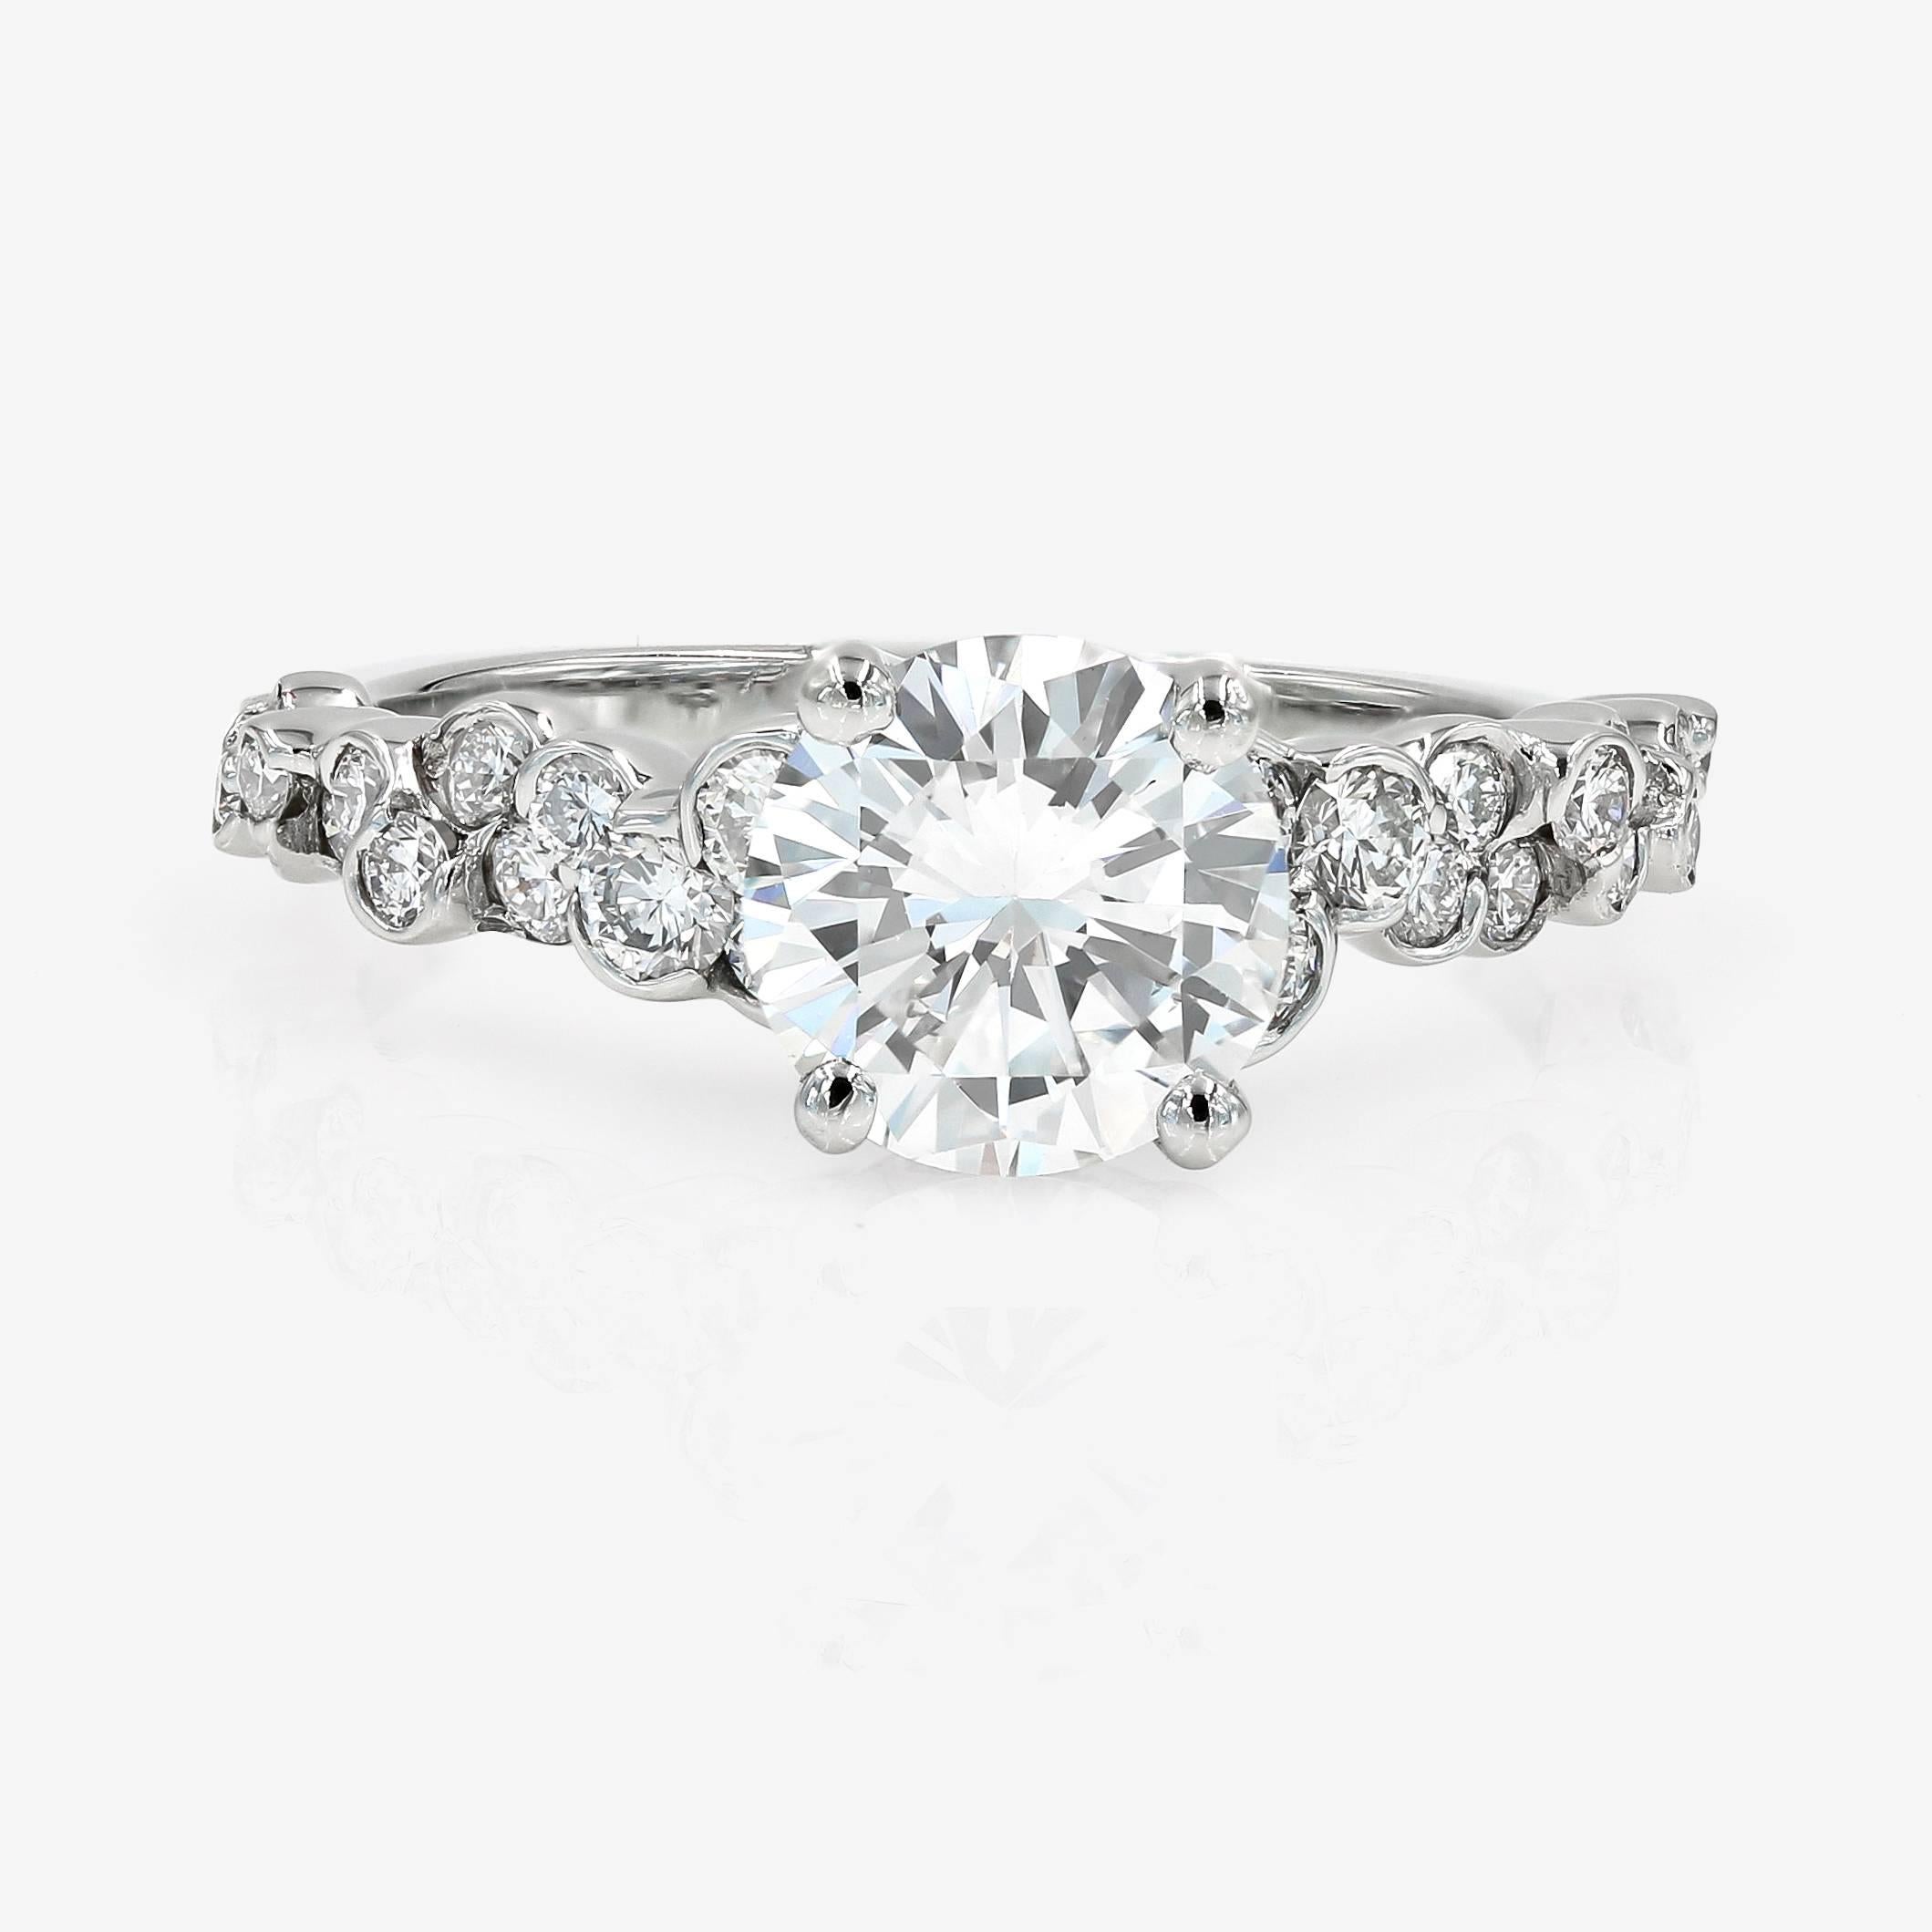 This Lester Lampert original CumuLLus Collection® style engagement ring in platinum features a 1.50cts. round center. It is surrounded by 36 ideal cut round diamonds= .73ct. t.w. (the rounds are G in color and VS in clarity)

This pieces comes with